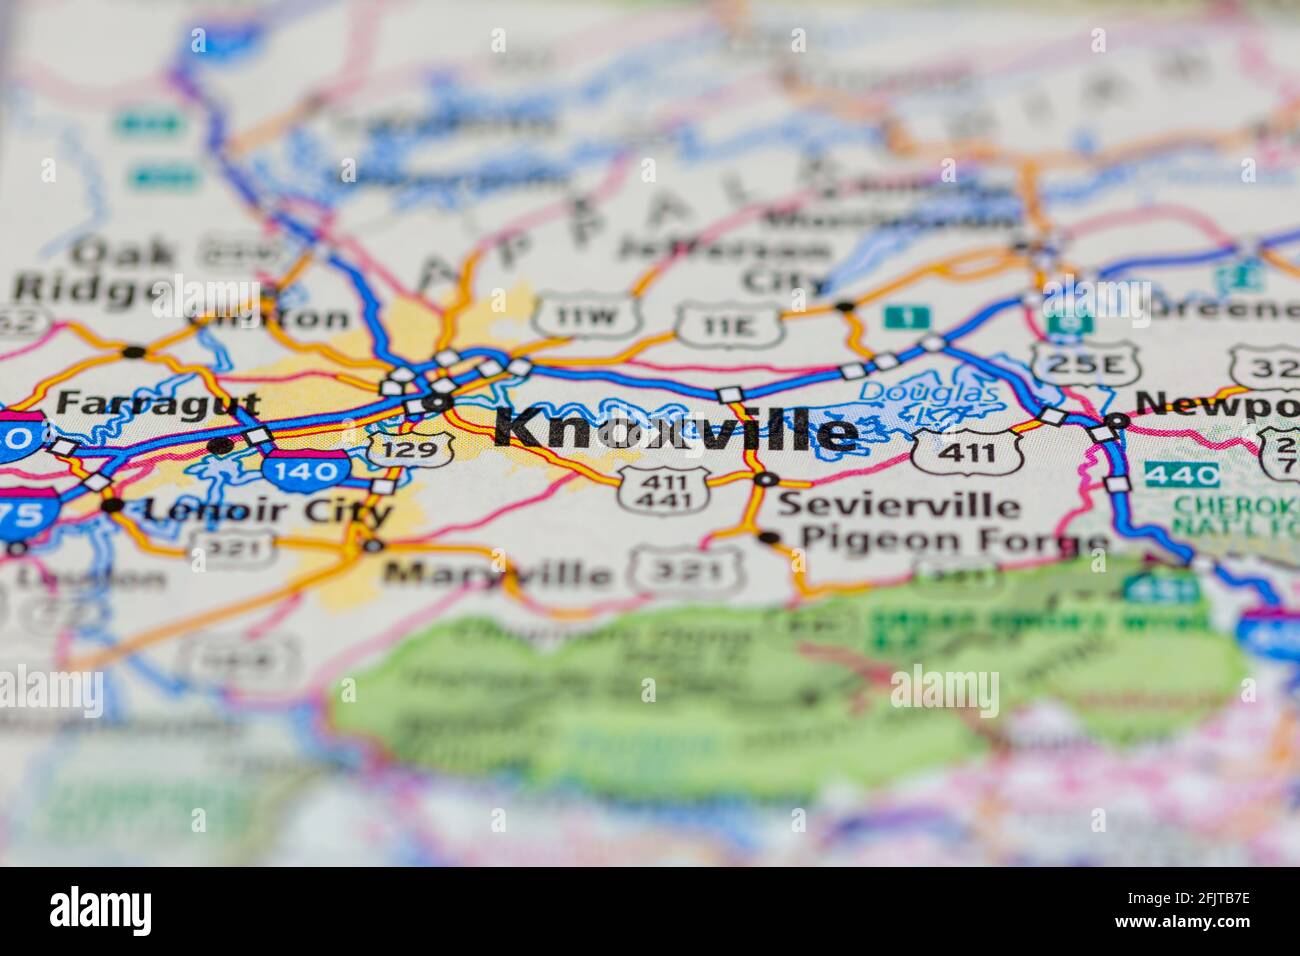 Knoxville Tennessee USA and surrounding areas Shown on a road map or Geography map Stock Photo